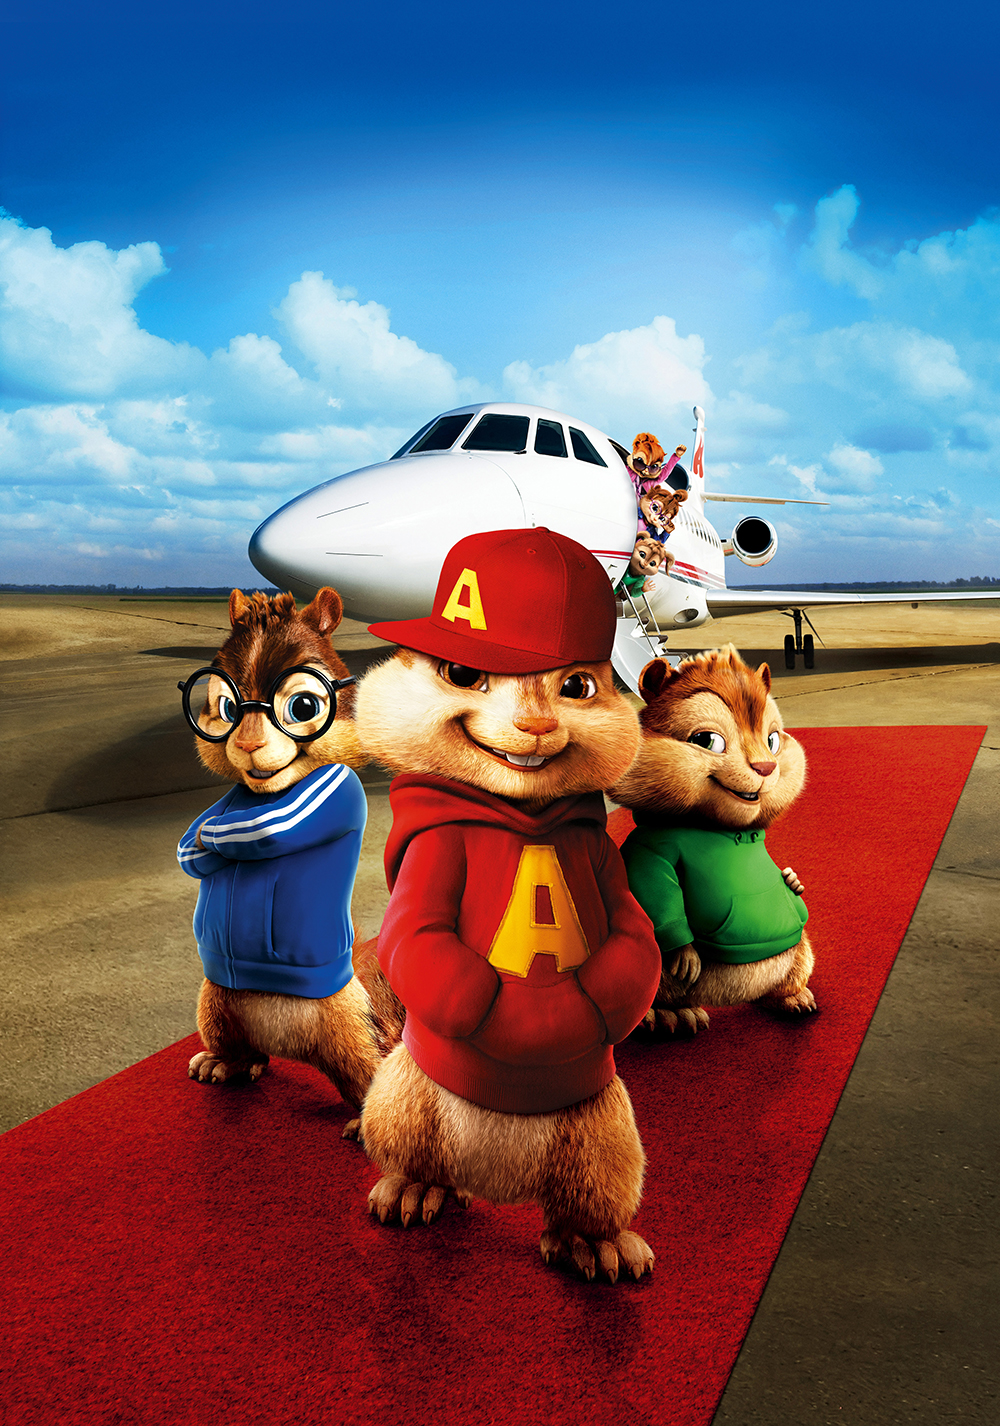 Alvin and the Chipmunks: The Squeakquel Picture